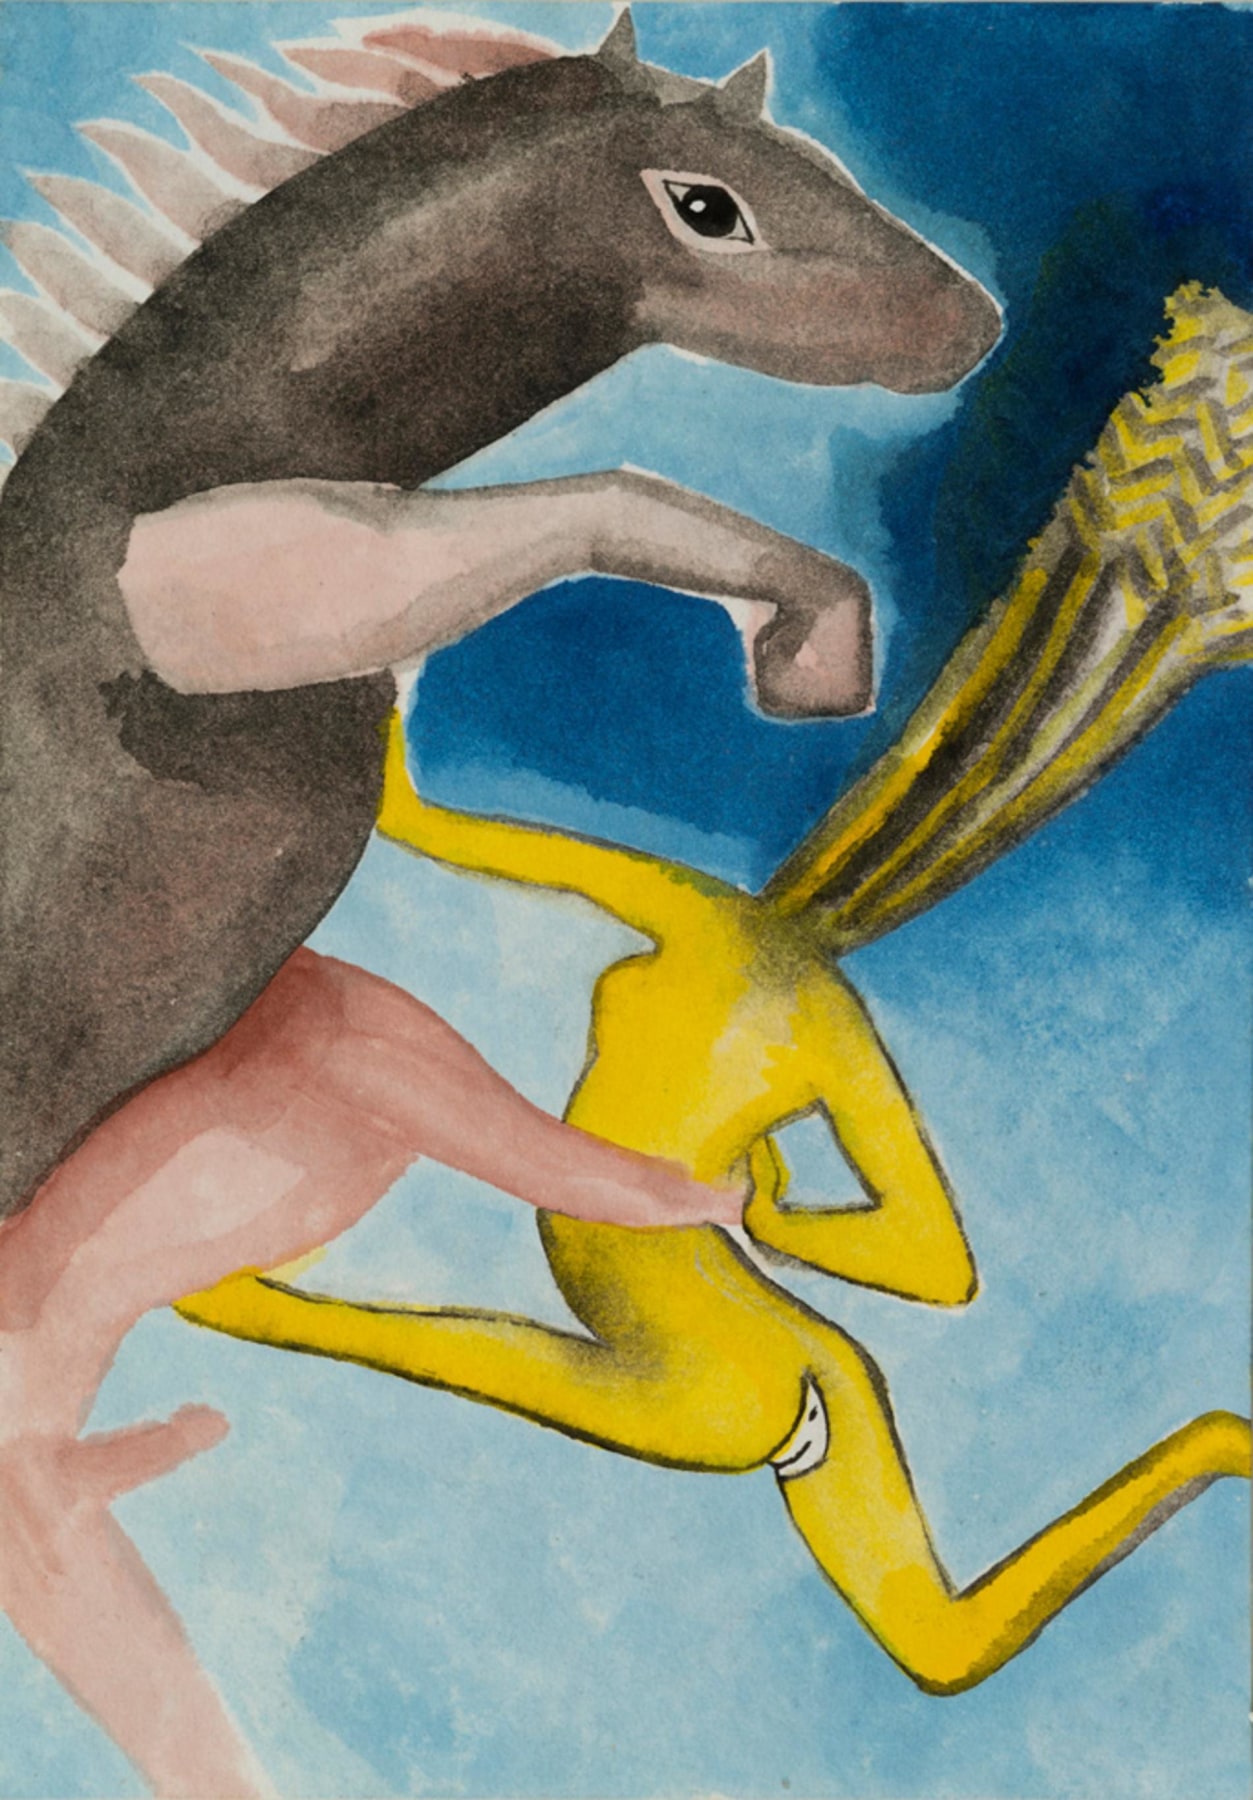 Image of FRANCESCO CLEMENTE's A Story Well Told (12), 2013